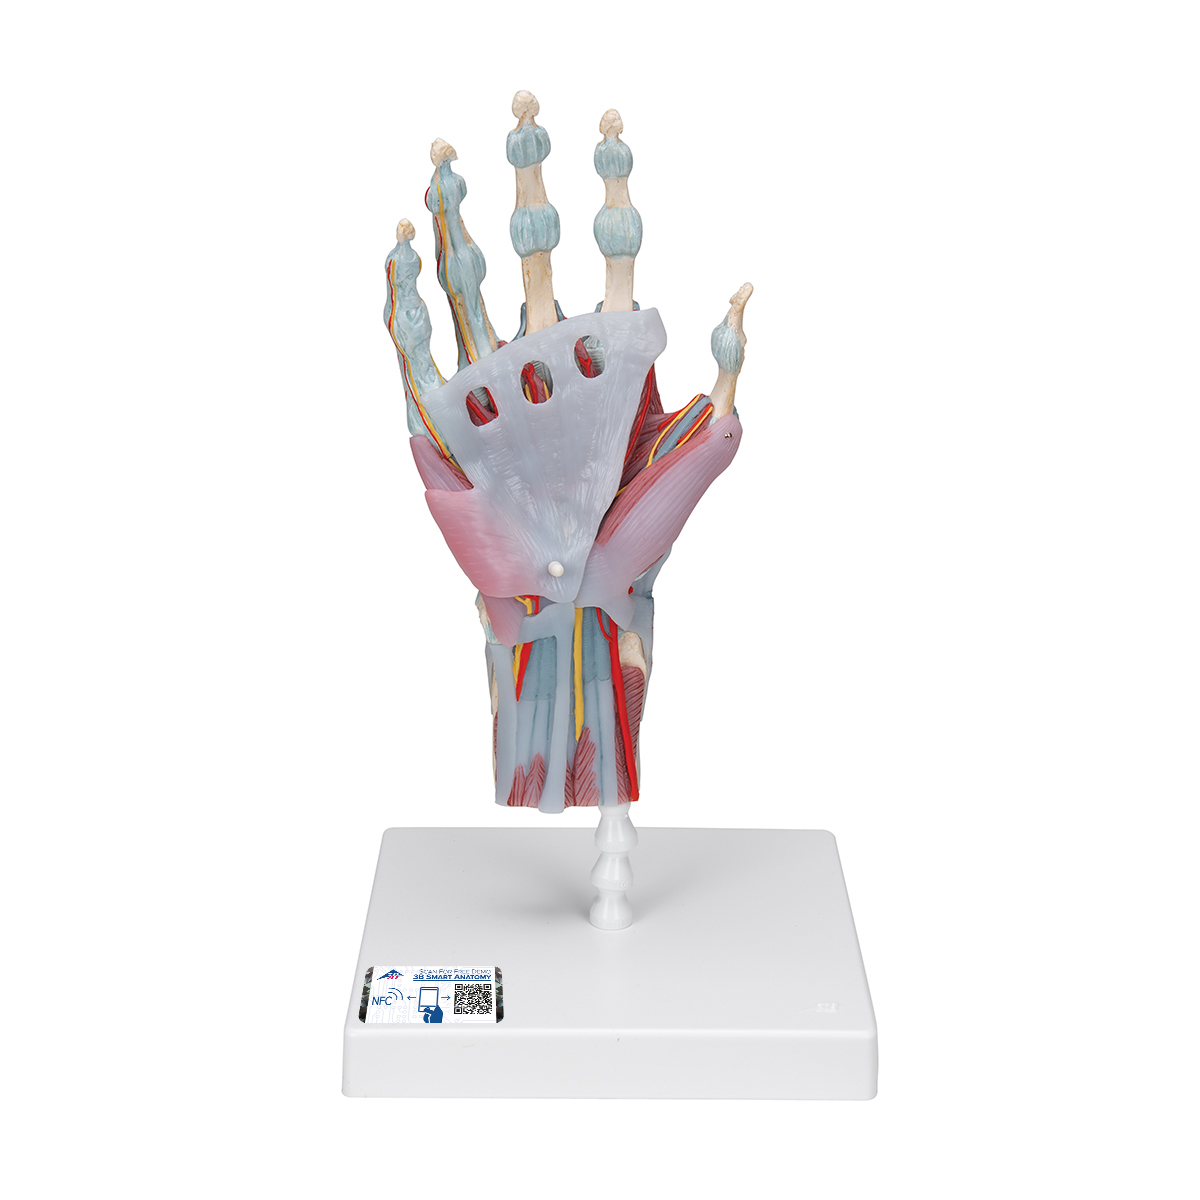 Color : White HHJJ Professional Hand Model Science Anatomy Life Joint Anatomical Skeleton 0827 0923 